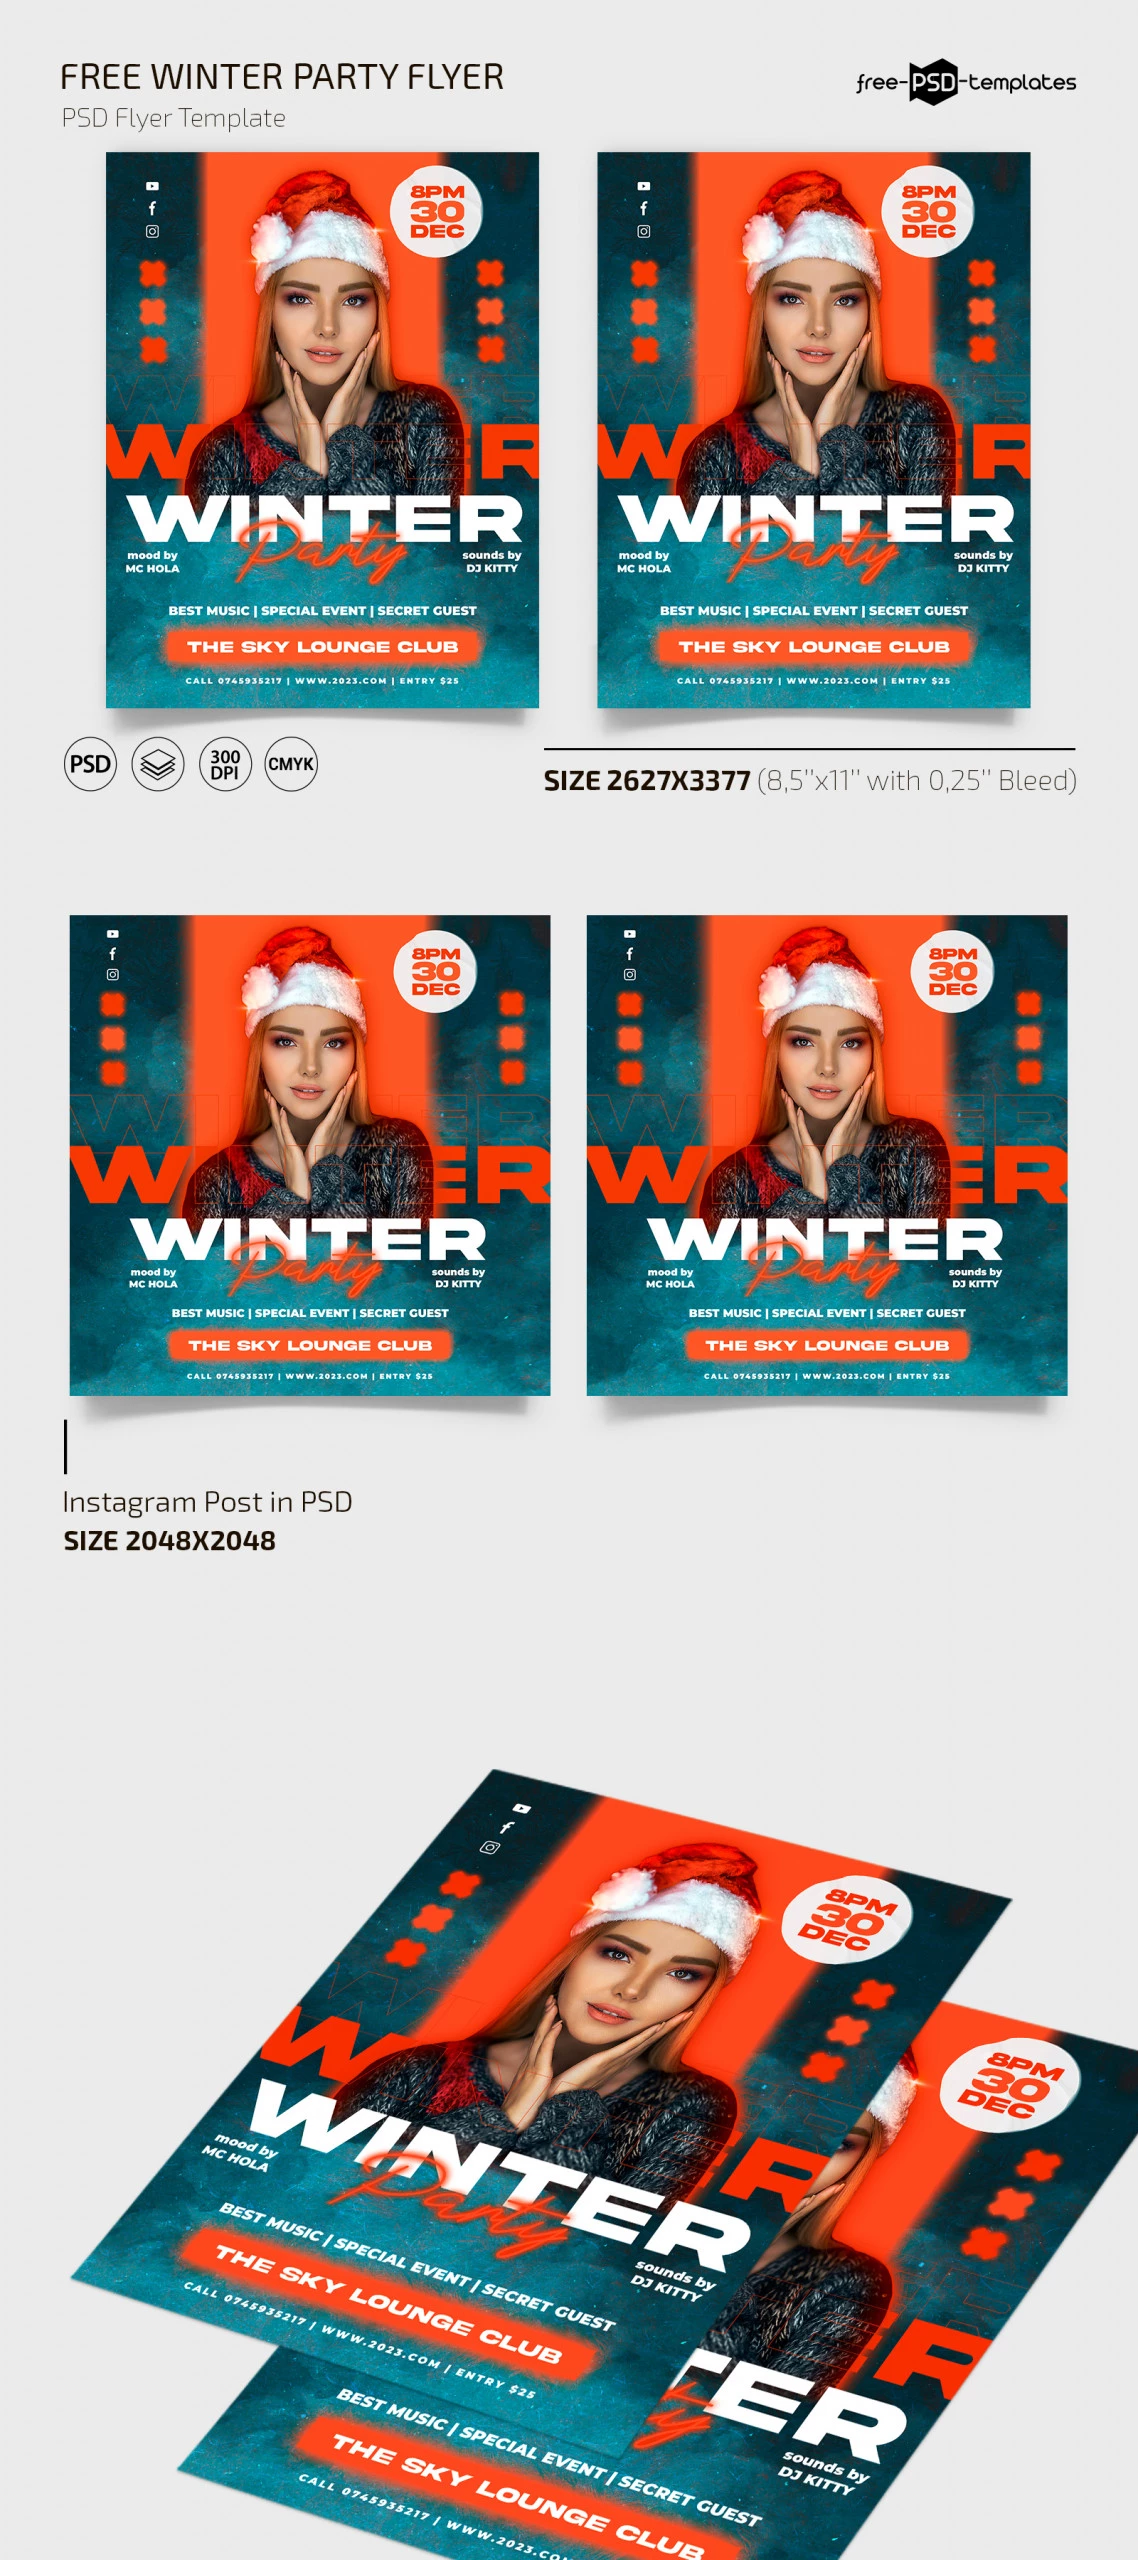 Free Winter Party Flyer Template + Instagram Post (PSD)